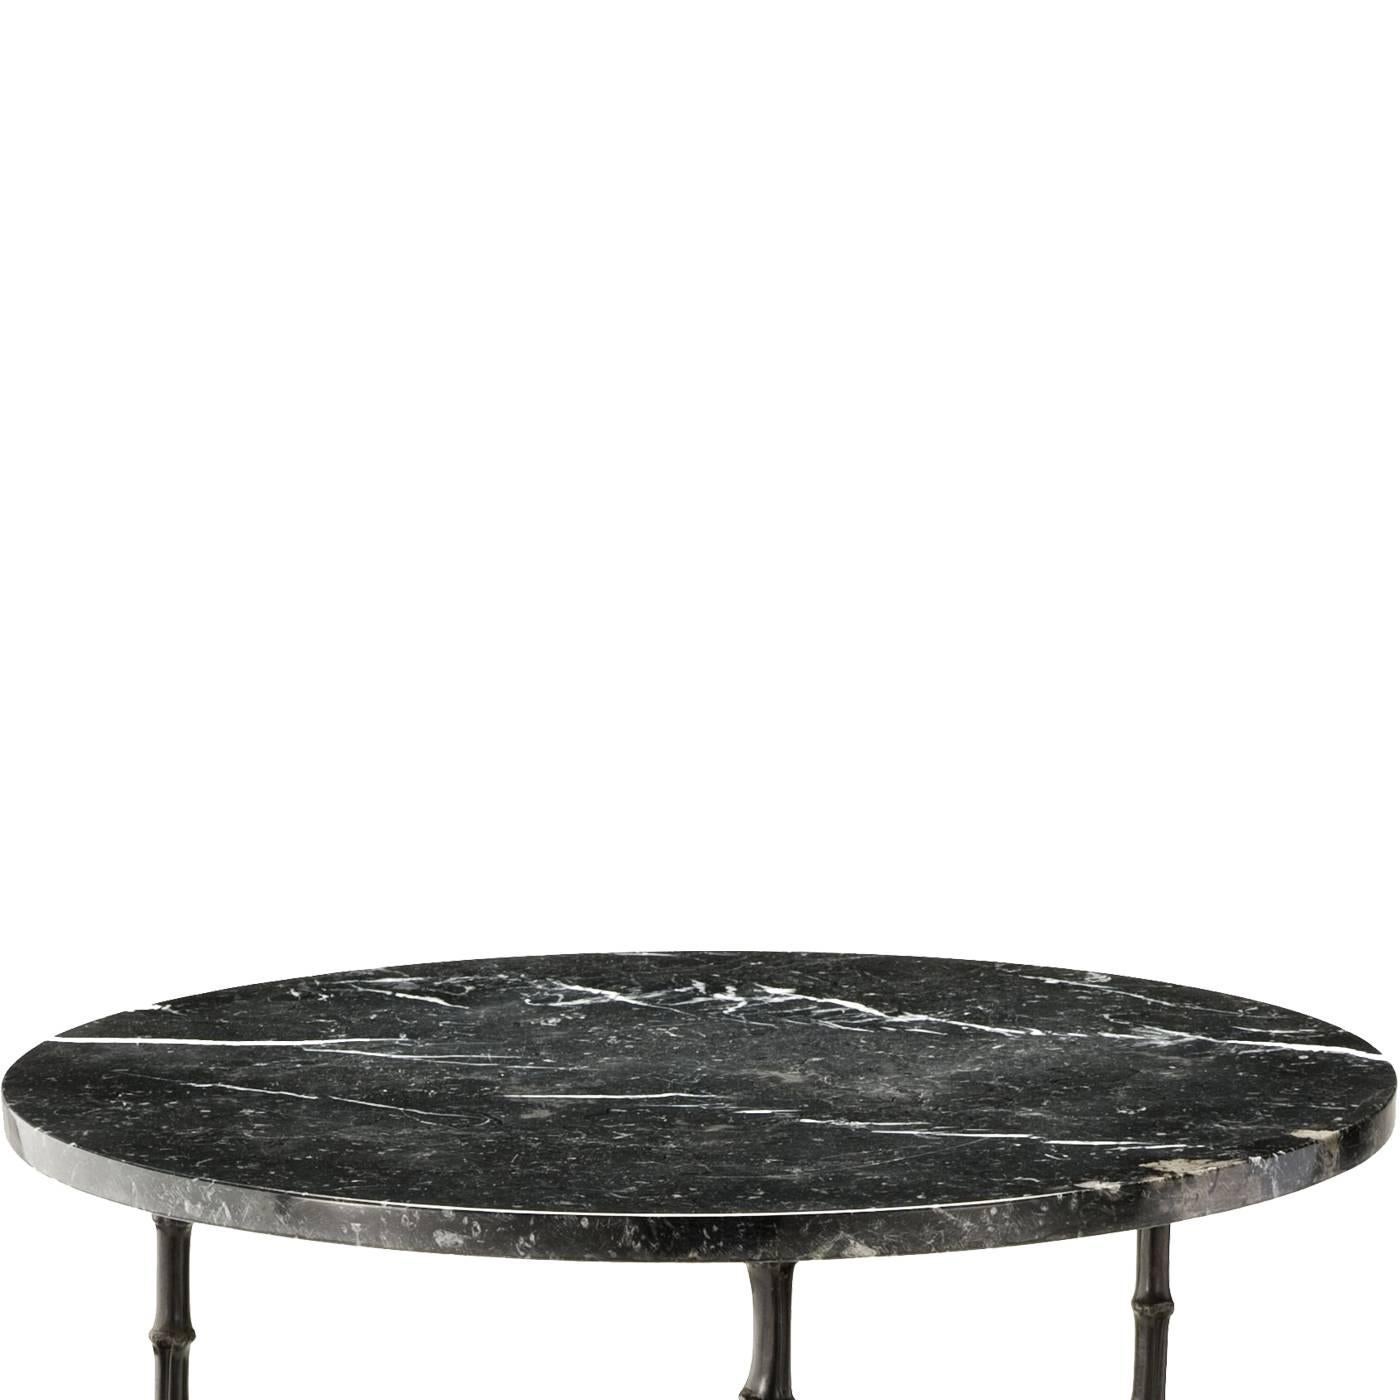 Black burnished brass table by Brass Brothers part of the Bamboo Collection with three feet that resemble the trunk of the plant for their natural effect. The base of the table is in black Marquina marble.